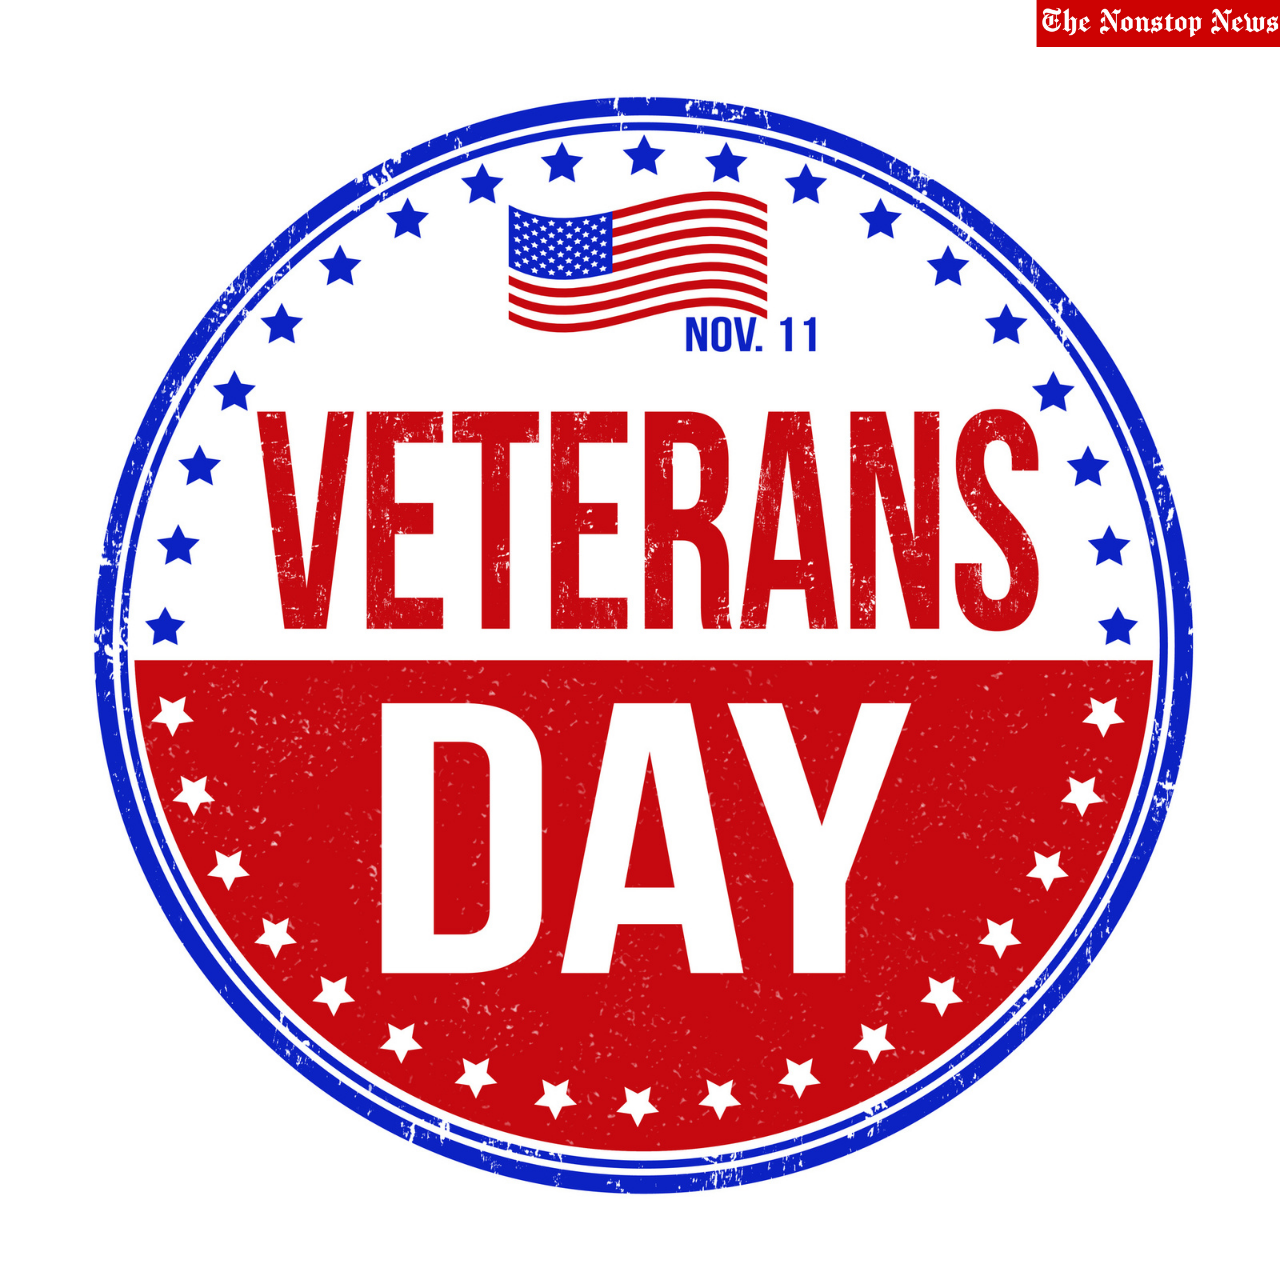 Veterans Day 2021 Instagram Quotes, Social Media Posts, WhatsApp Status, HD Images, and Poster to honor US Veterans